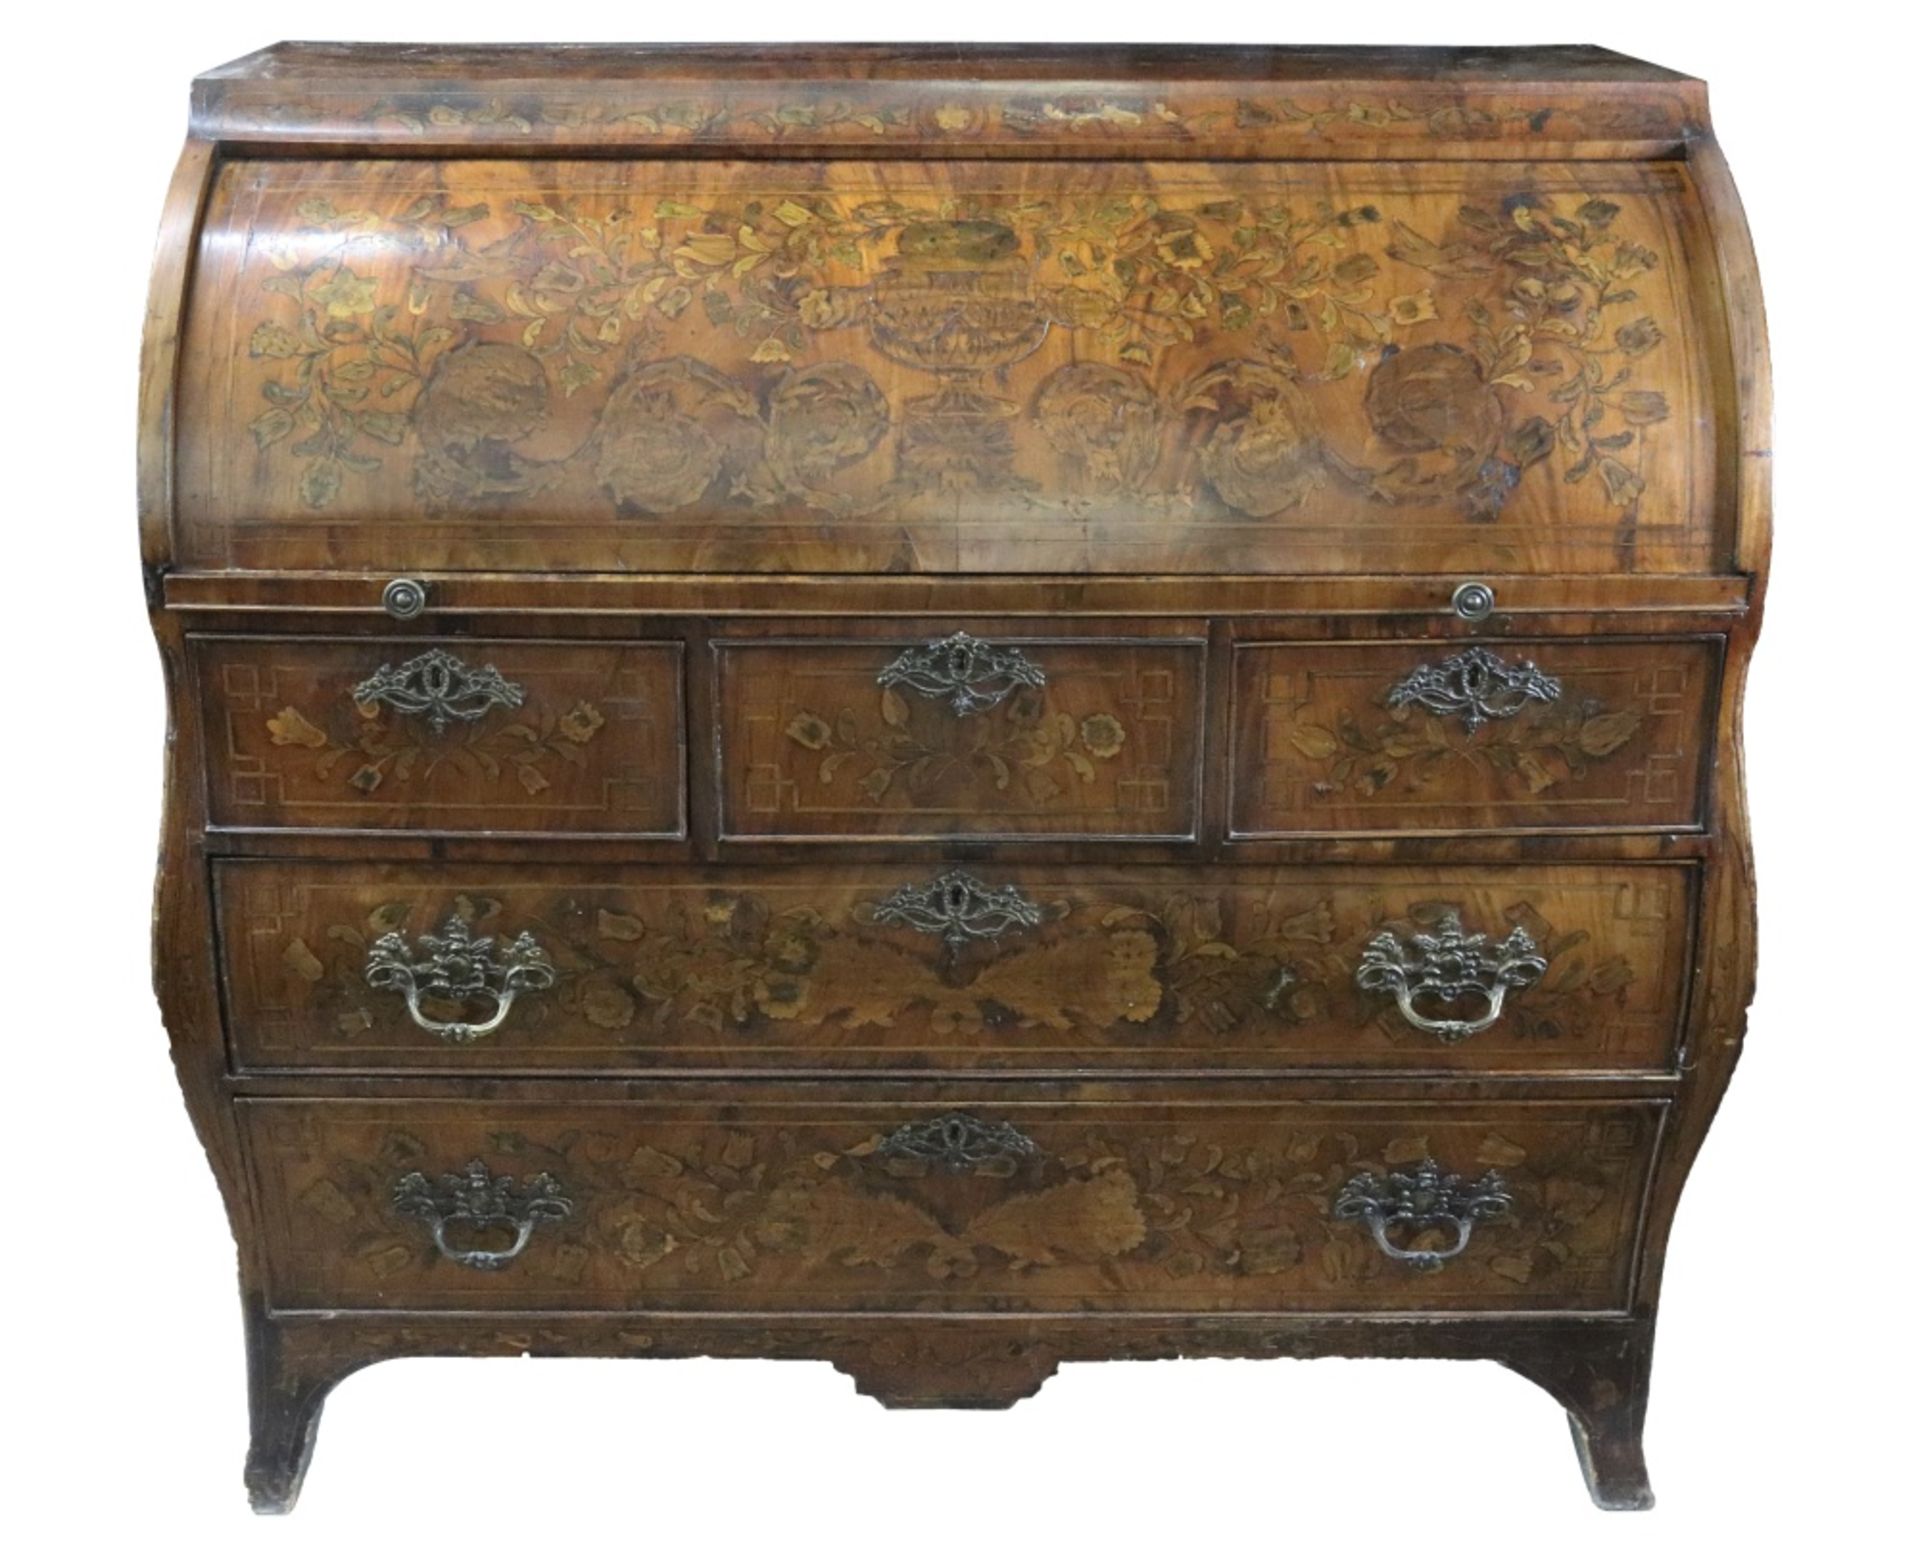 A Dutch walnut floral and bird marquetry cylinder front bombe bureau, late 18th century, - Image 2 of 4